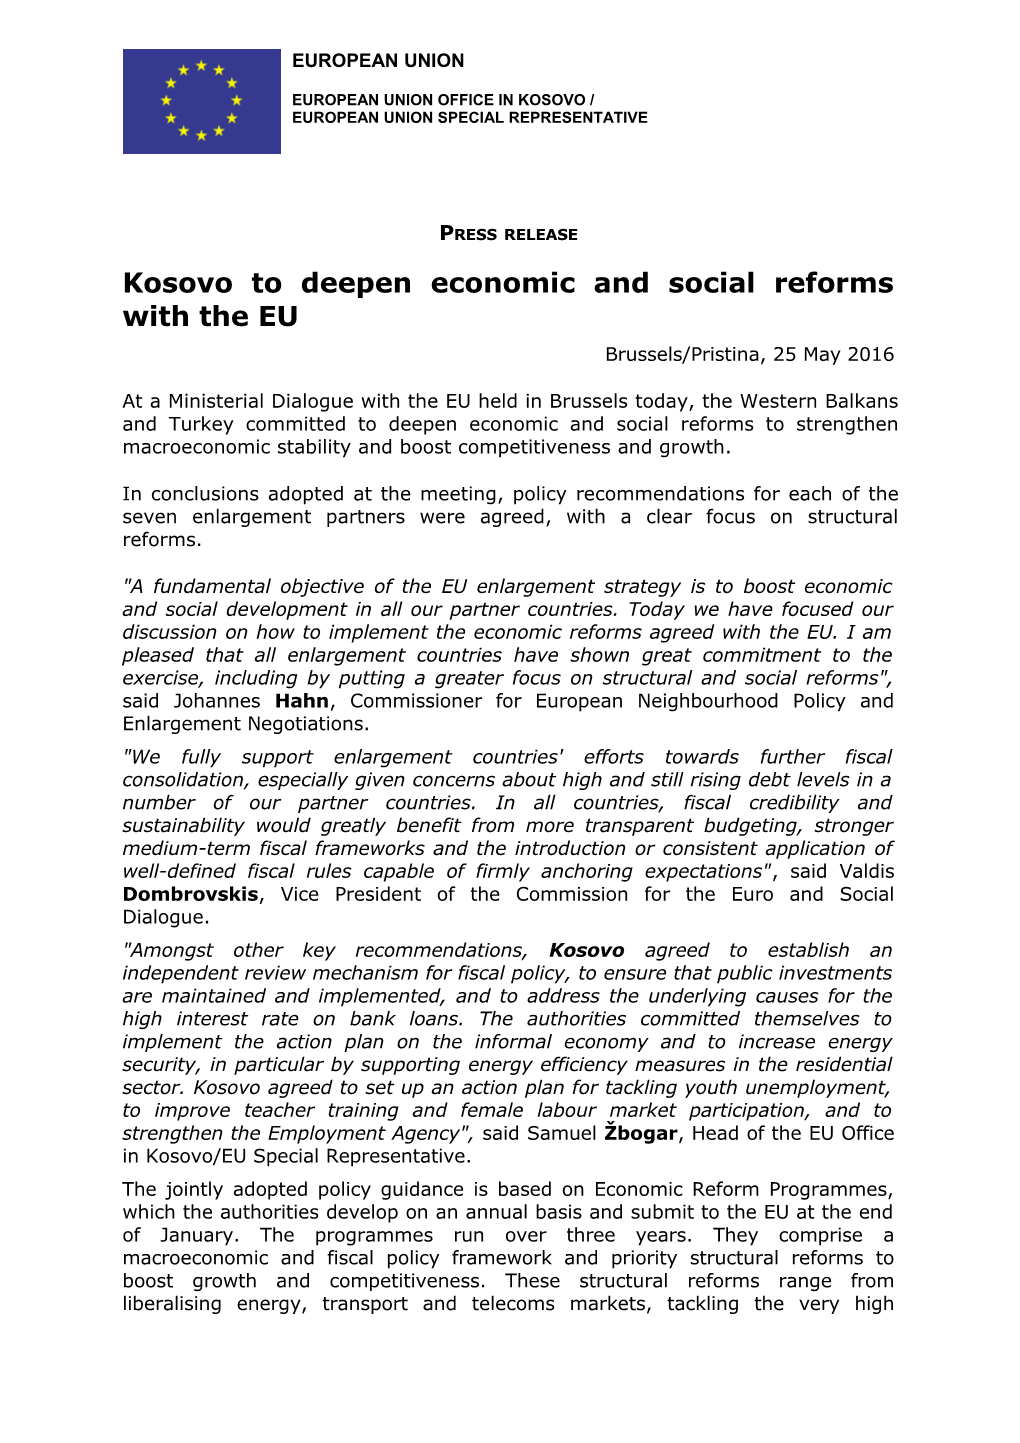 Kosovo to Deepen Economic and Social Reforms with the EU